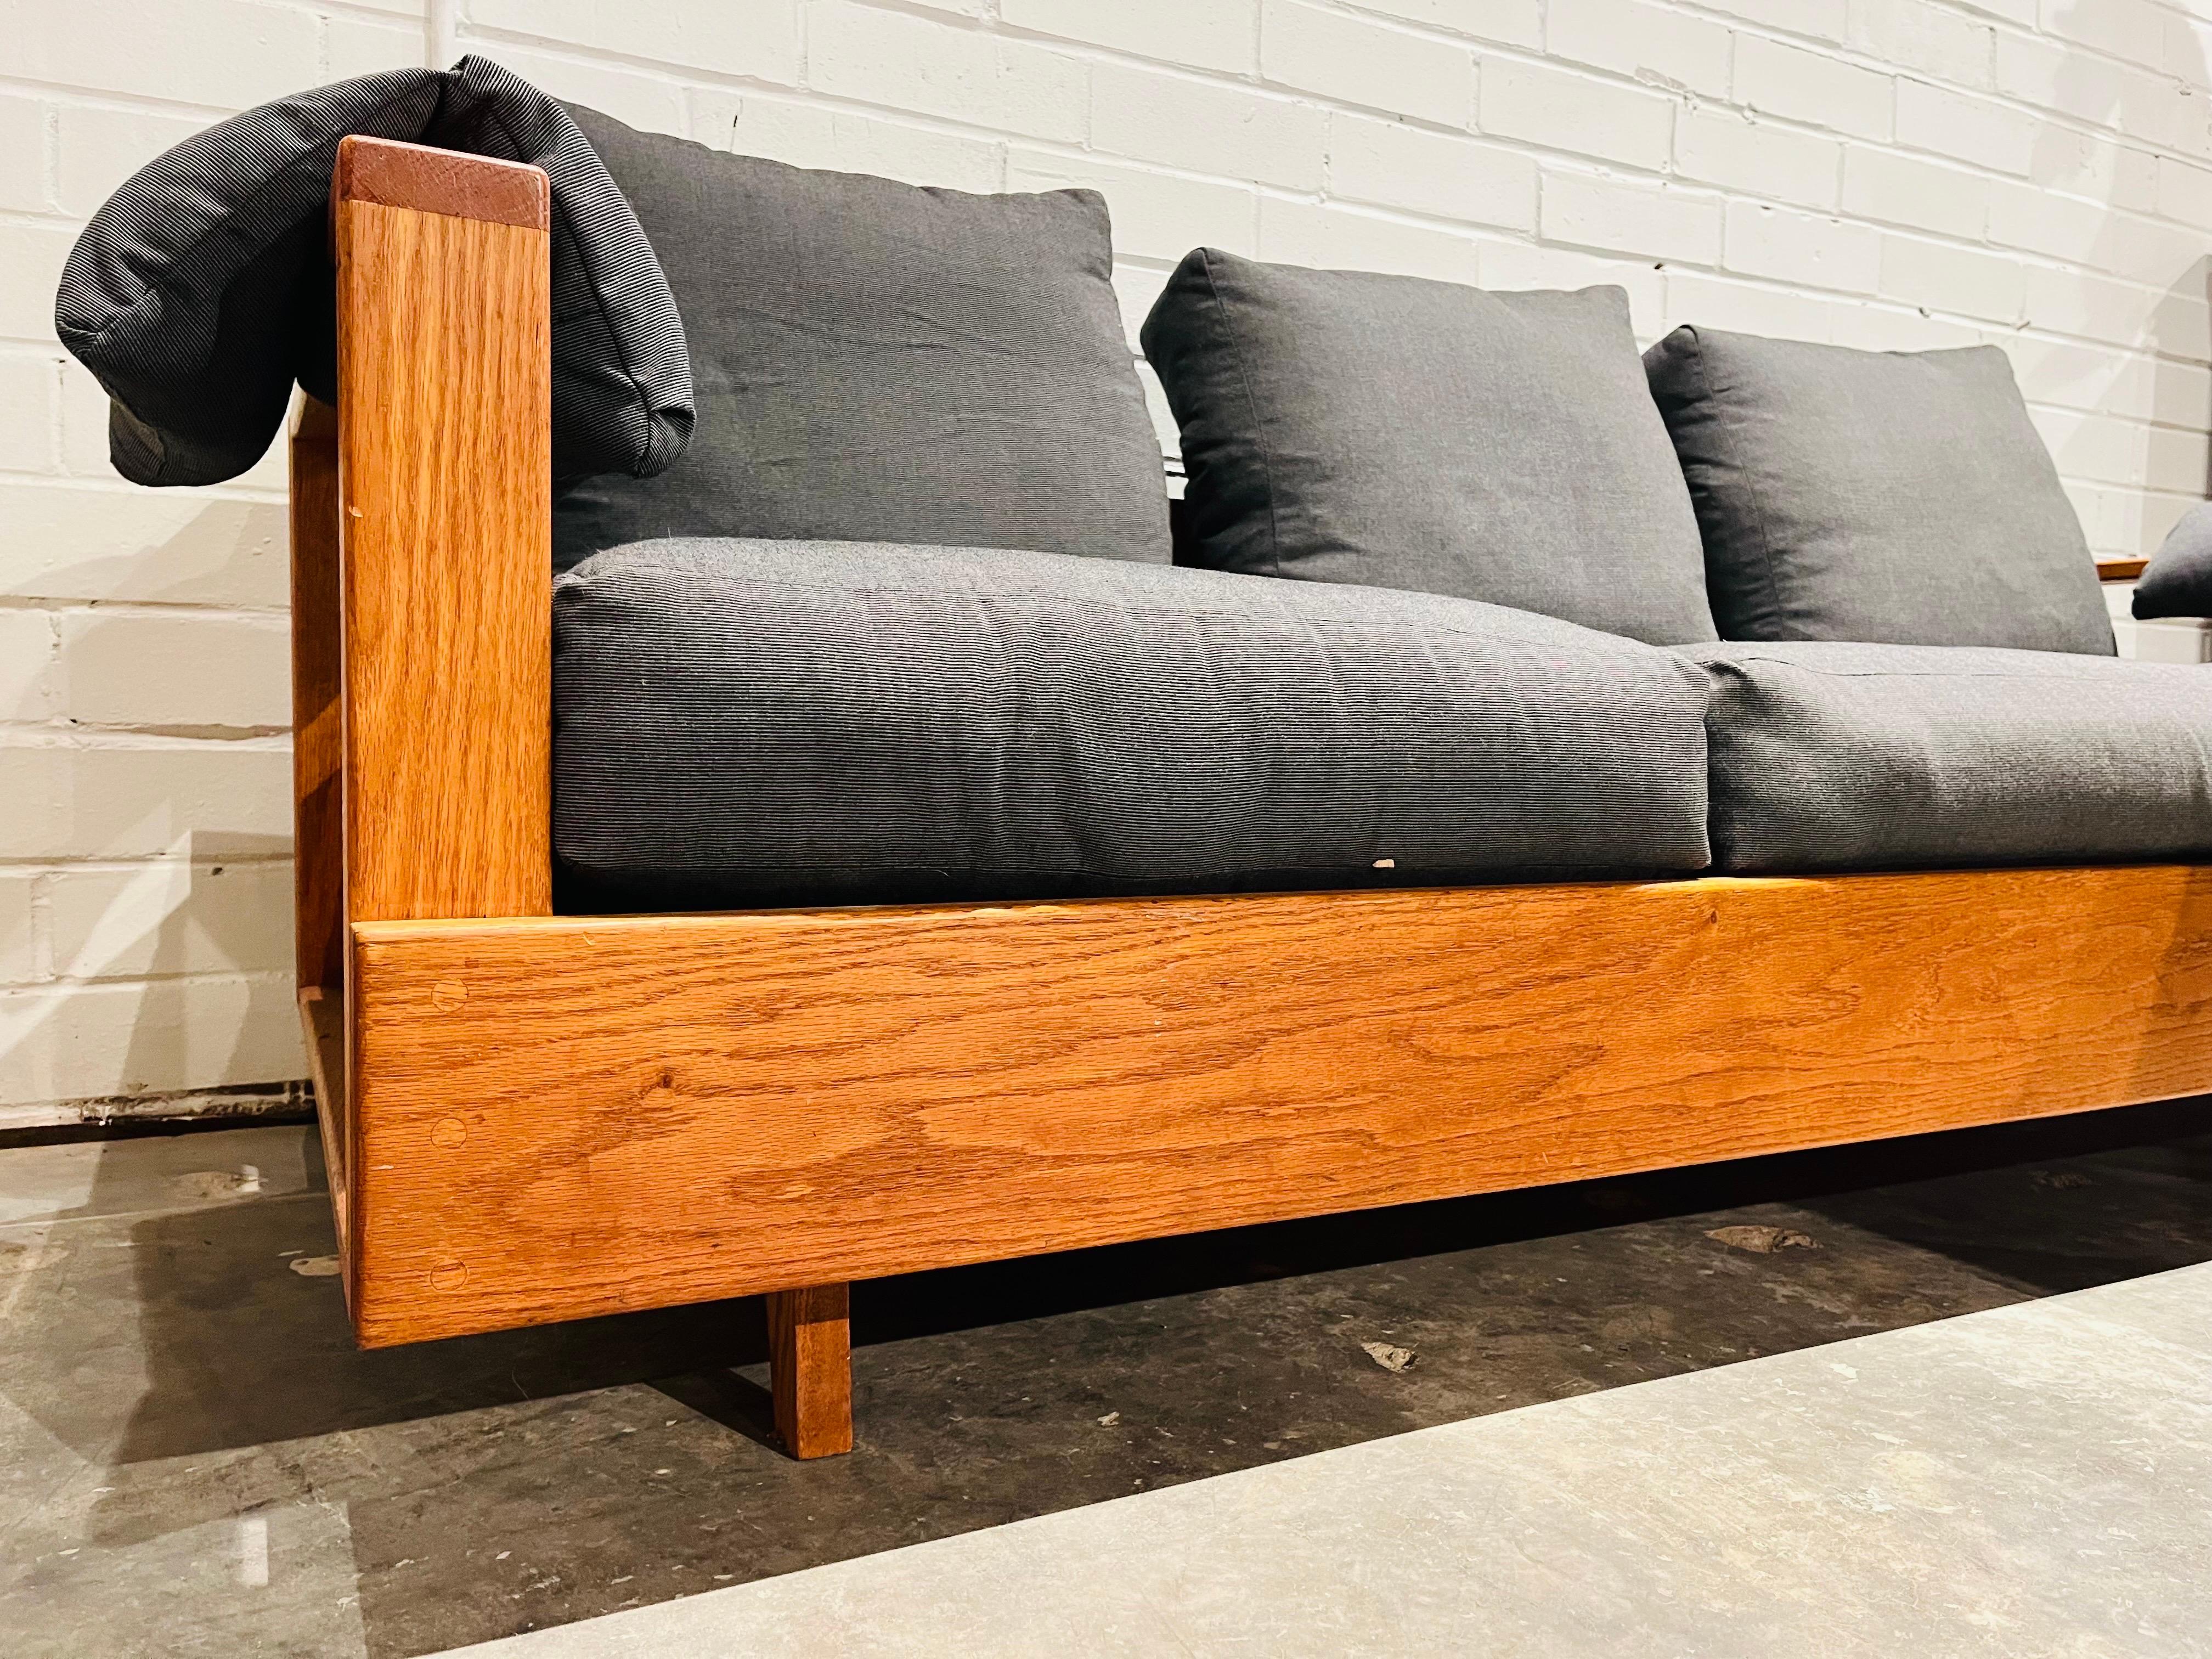 A unique, vintage, custom designed and hand built three seat wood frame sofa. The joinery in the construction of this sofa is truly beautiful as no fasteners are viewable. The solid wood frame has a twenty three inch high back. The feet of the sofa